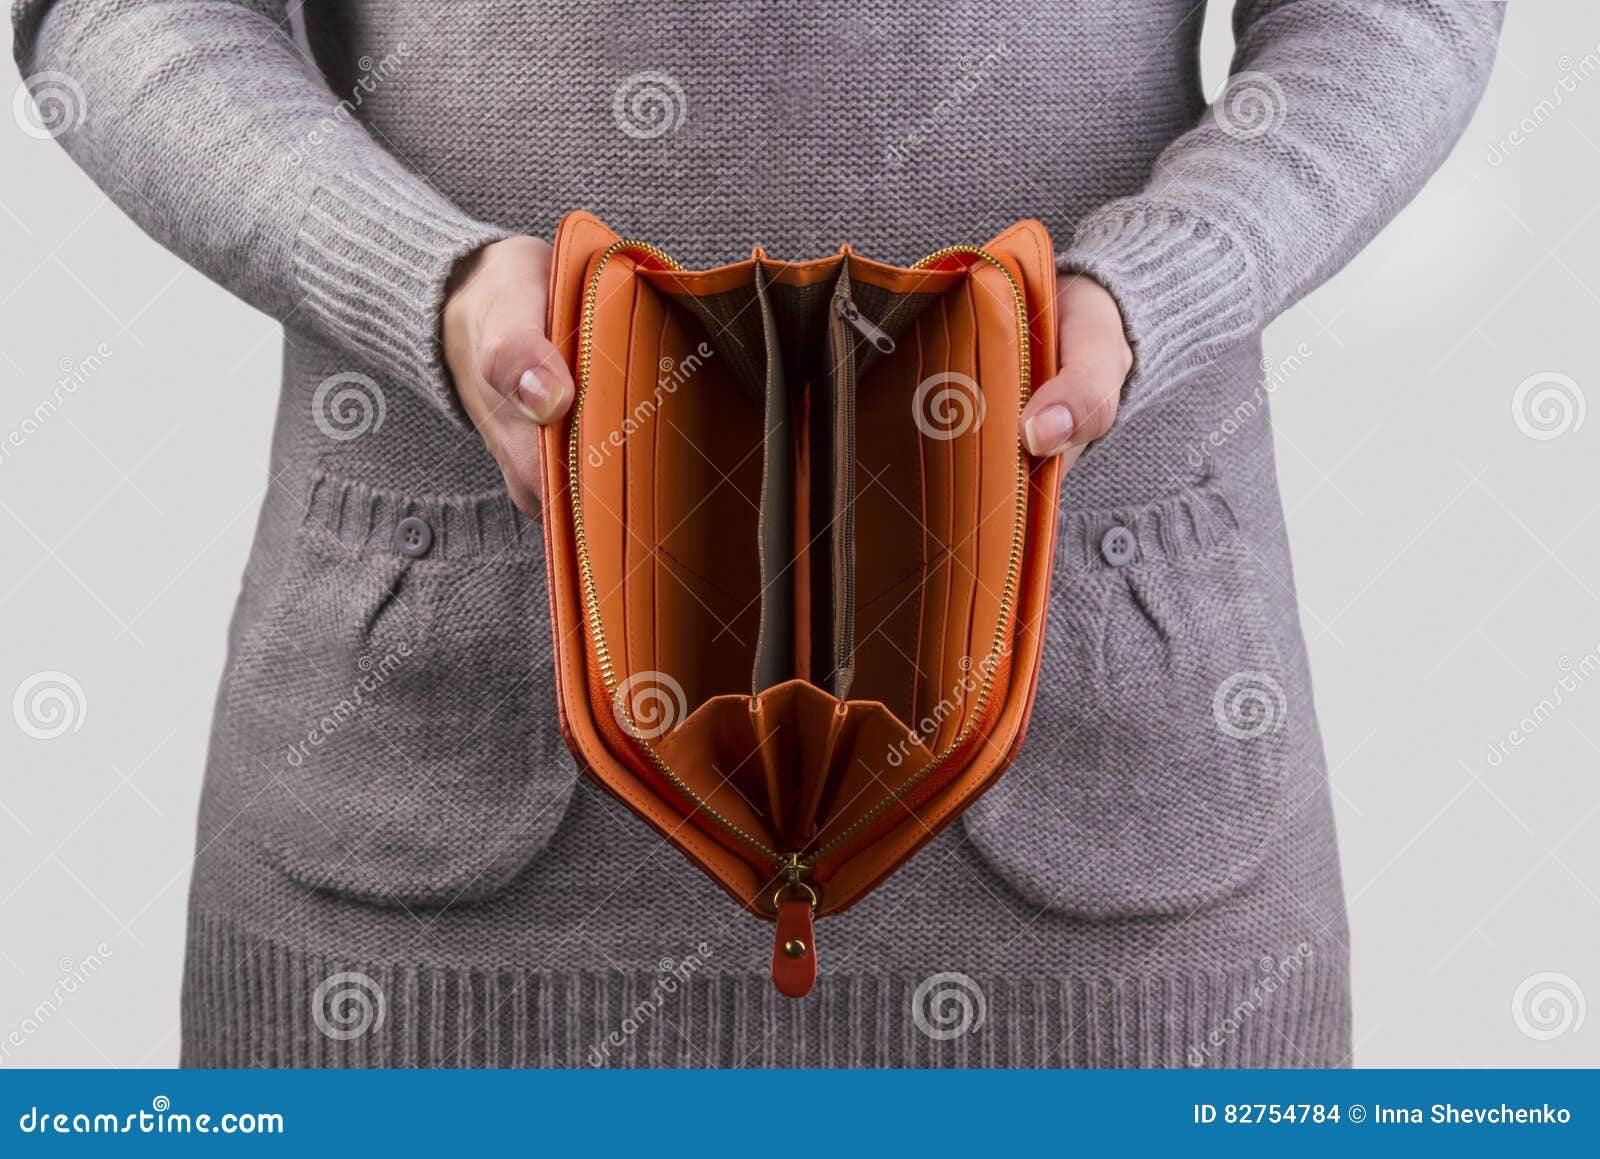 Premium Photo | Woman holds an empty purse and coins in hand meaning money  financial problem or bankrupt jobless, broke after credit card payday  jobless.